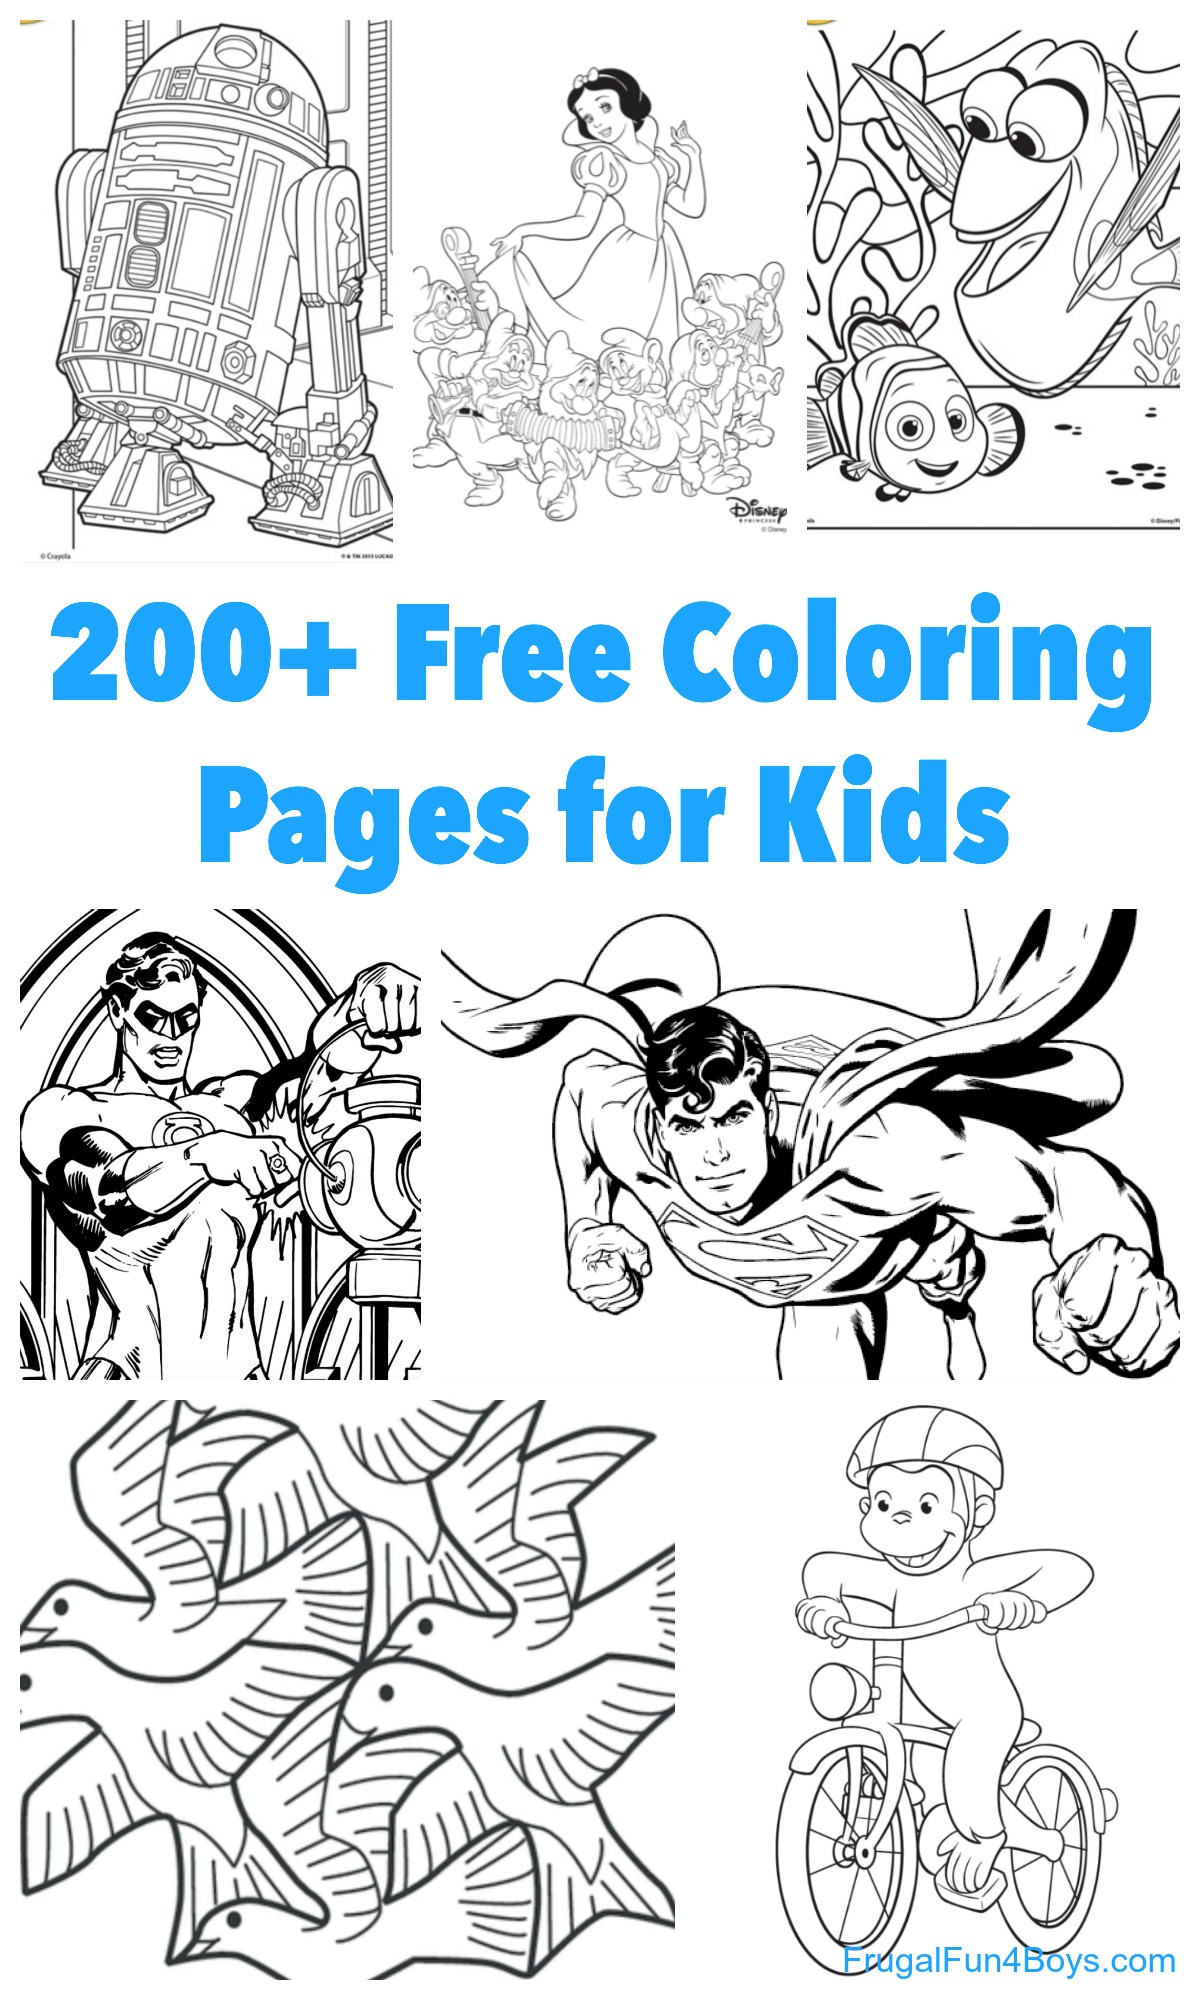 Printable Coloring Sheets For Girls
 200 Printable Coloring Pages for Kids Frugal Fun For